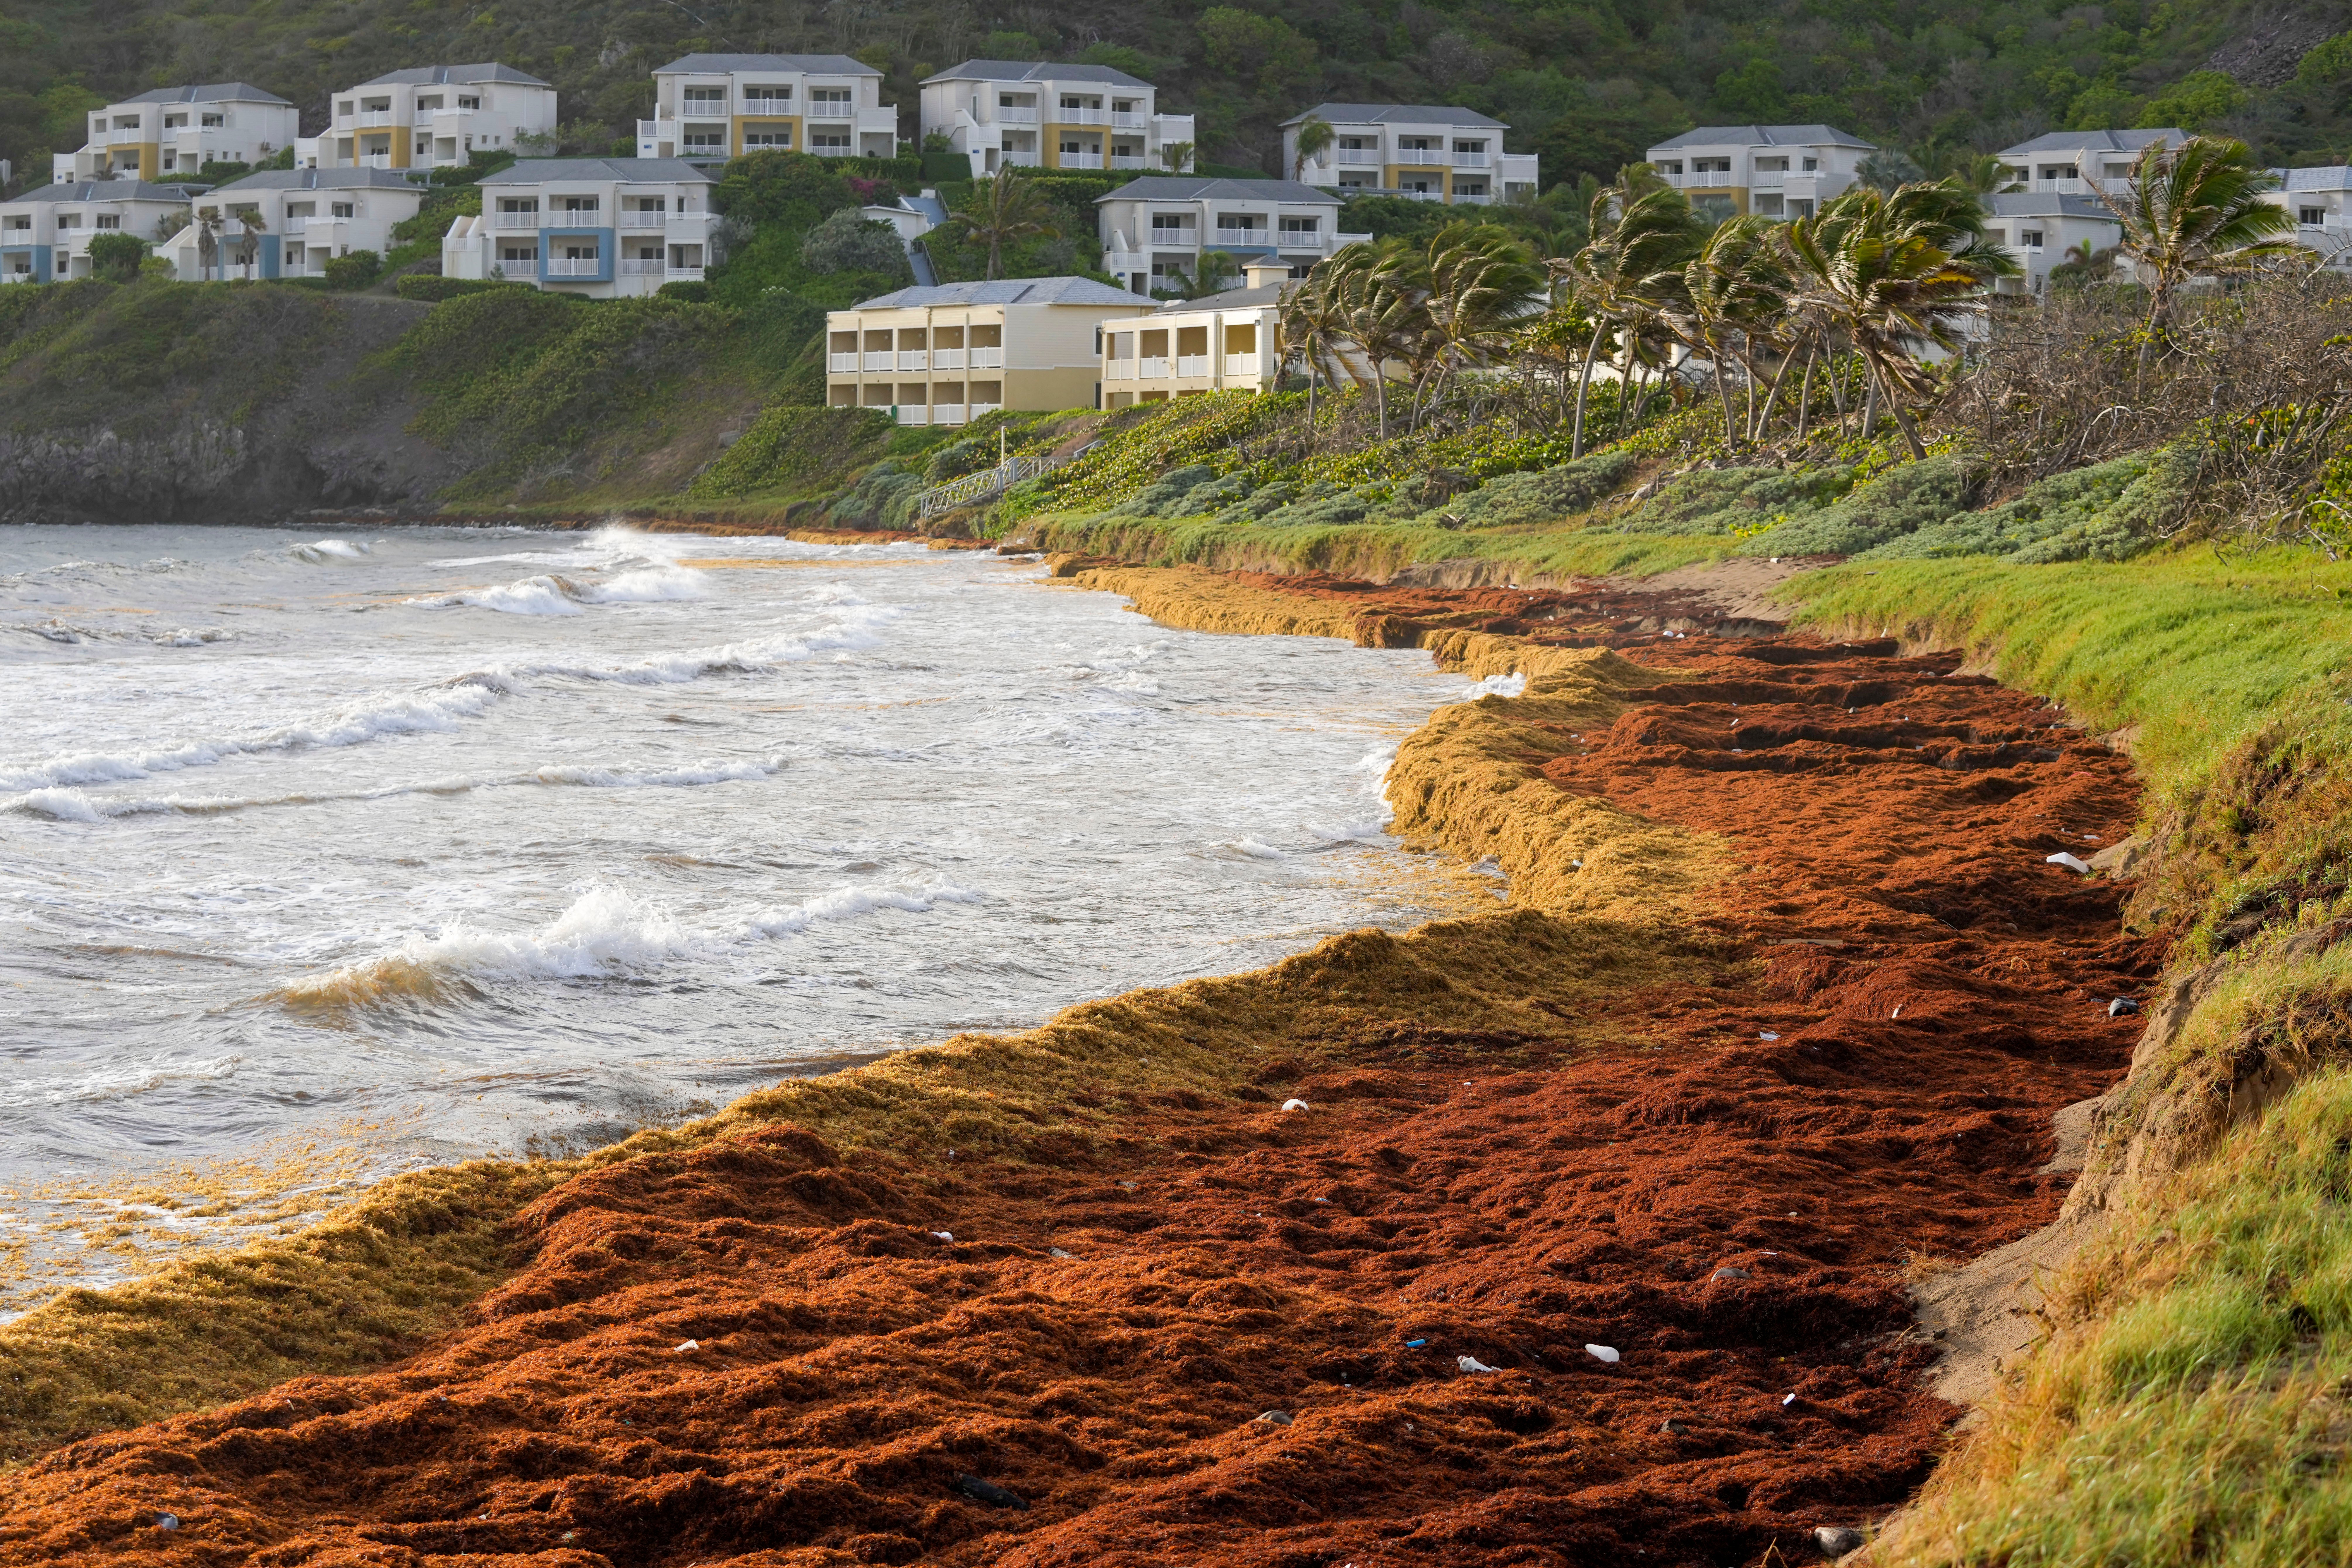 Seaweed covers the Atlantic shore in Frigate Bay, St. Kitts and Nevis